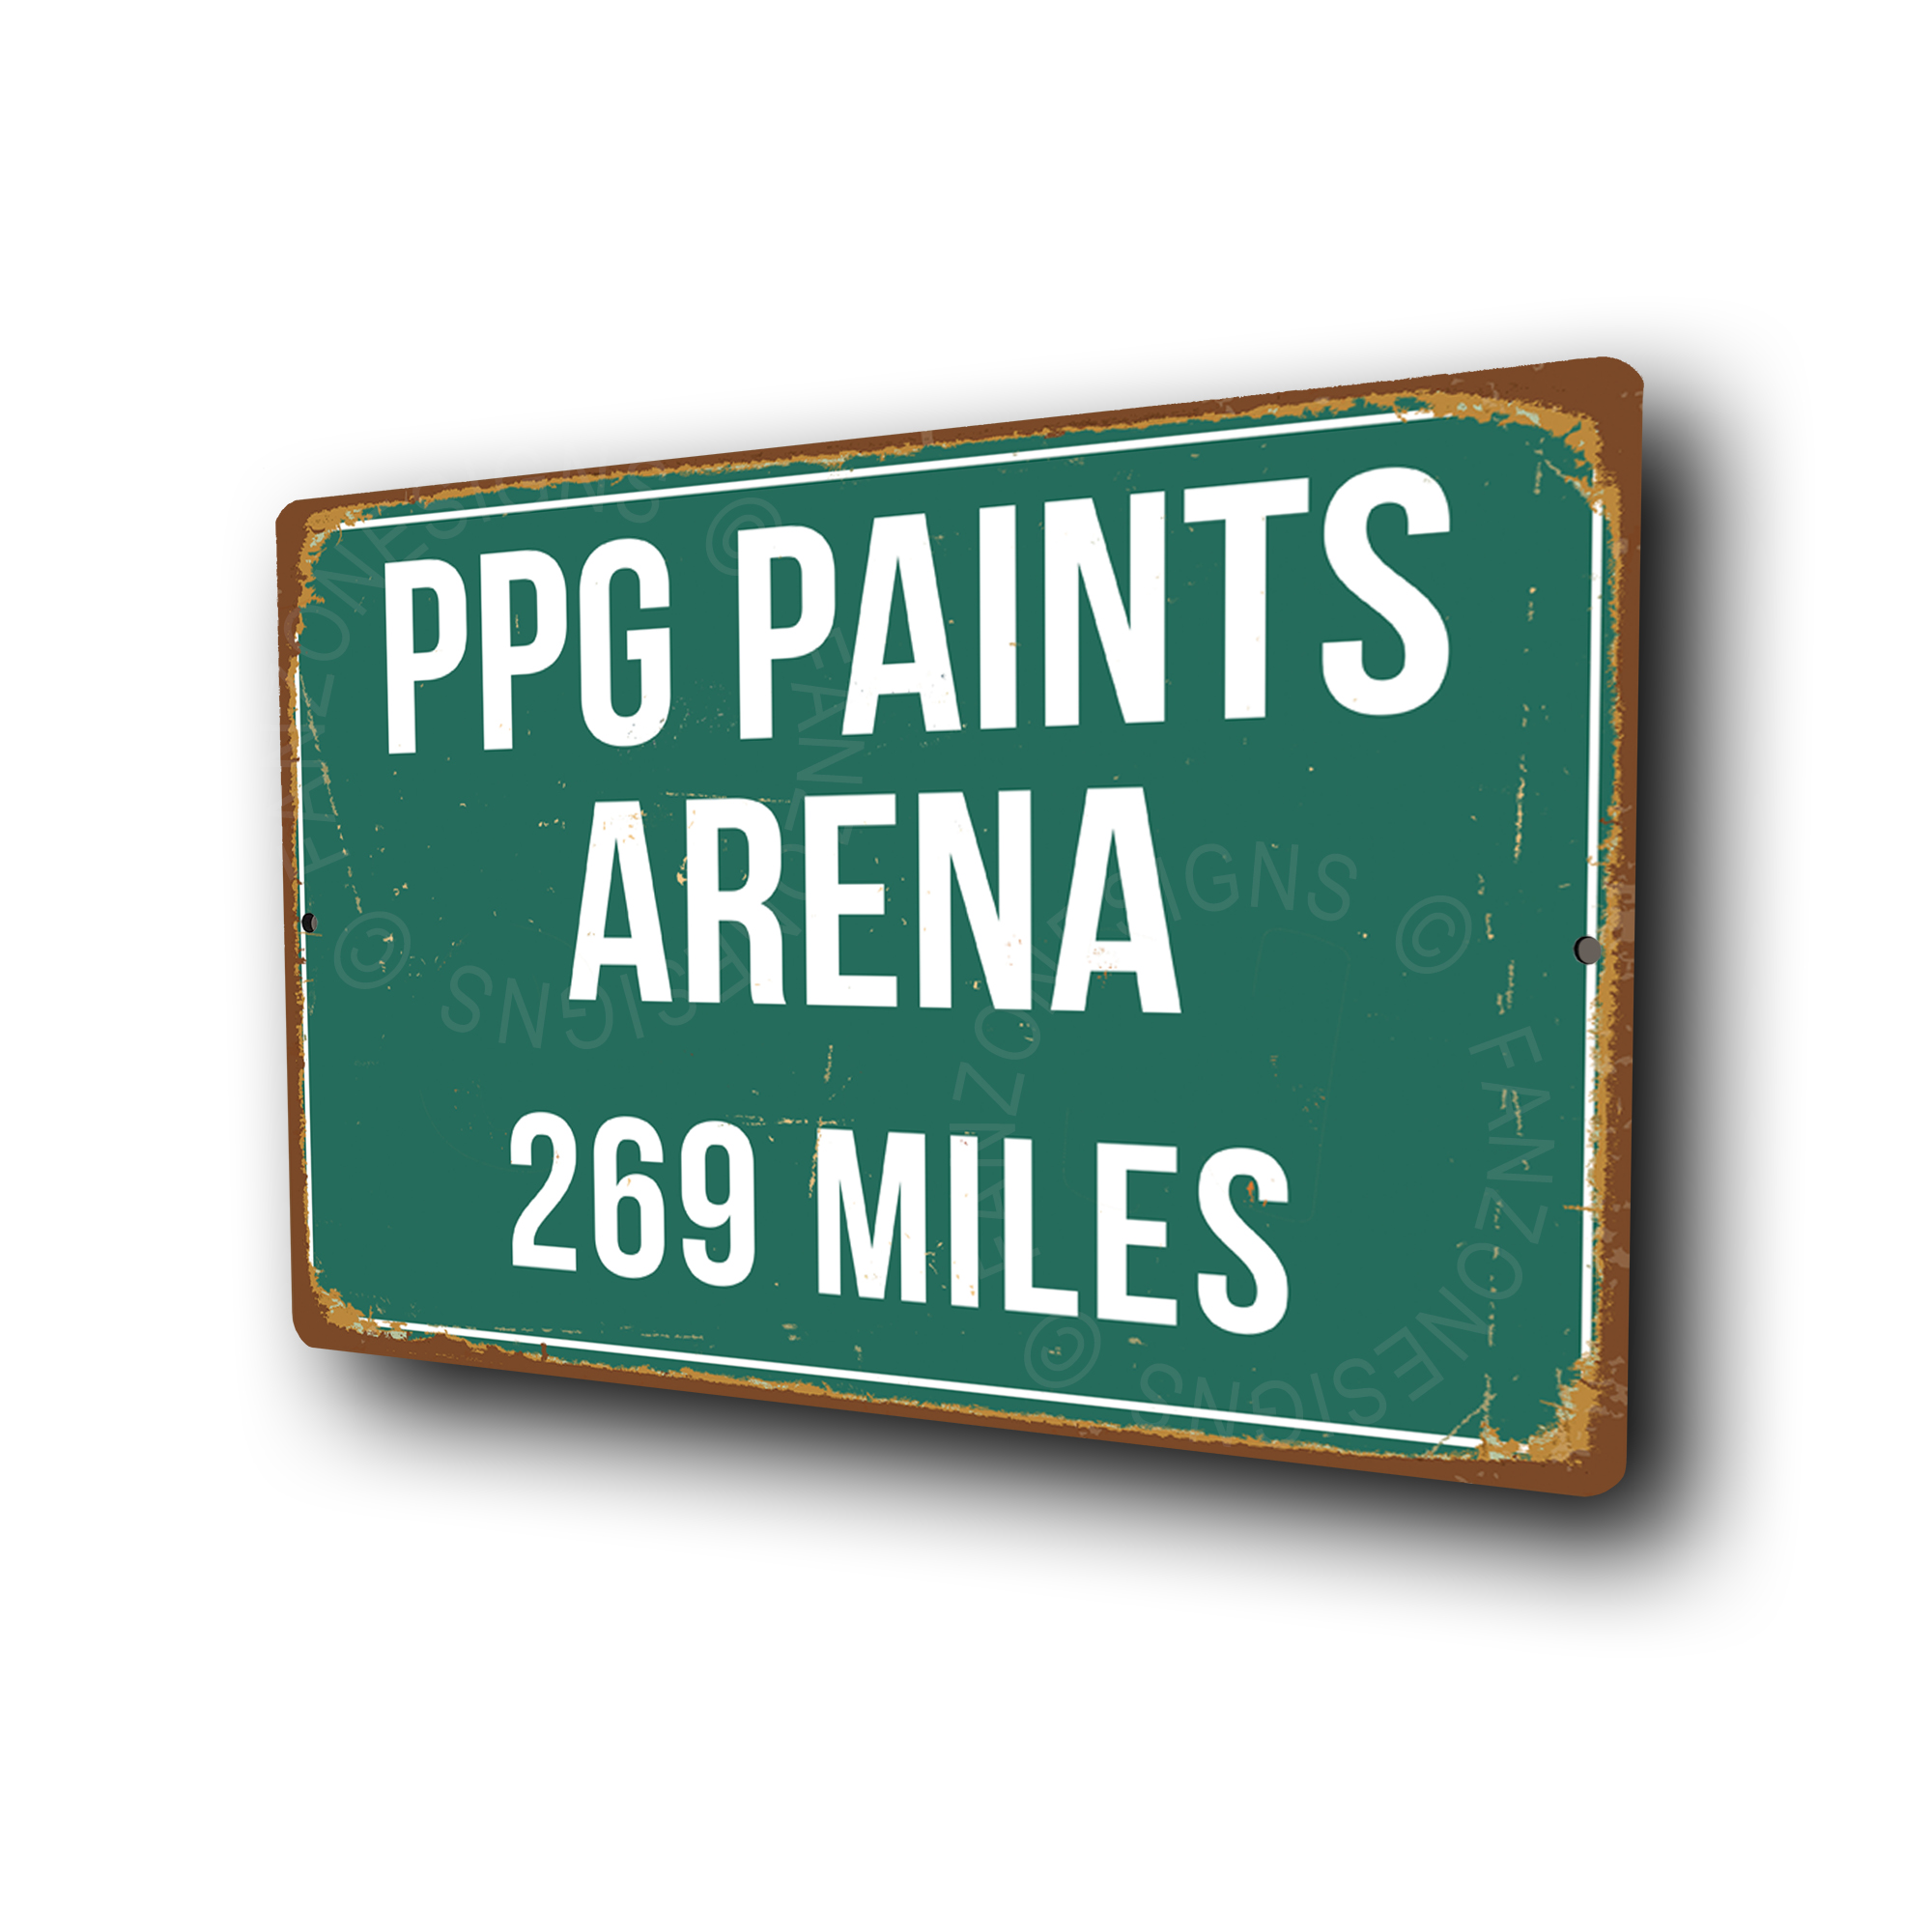 PPG Paints Arena Signs